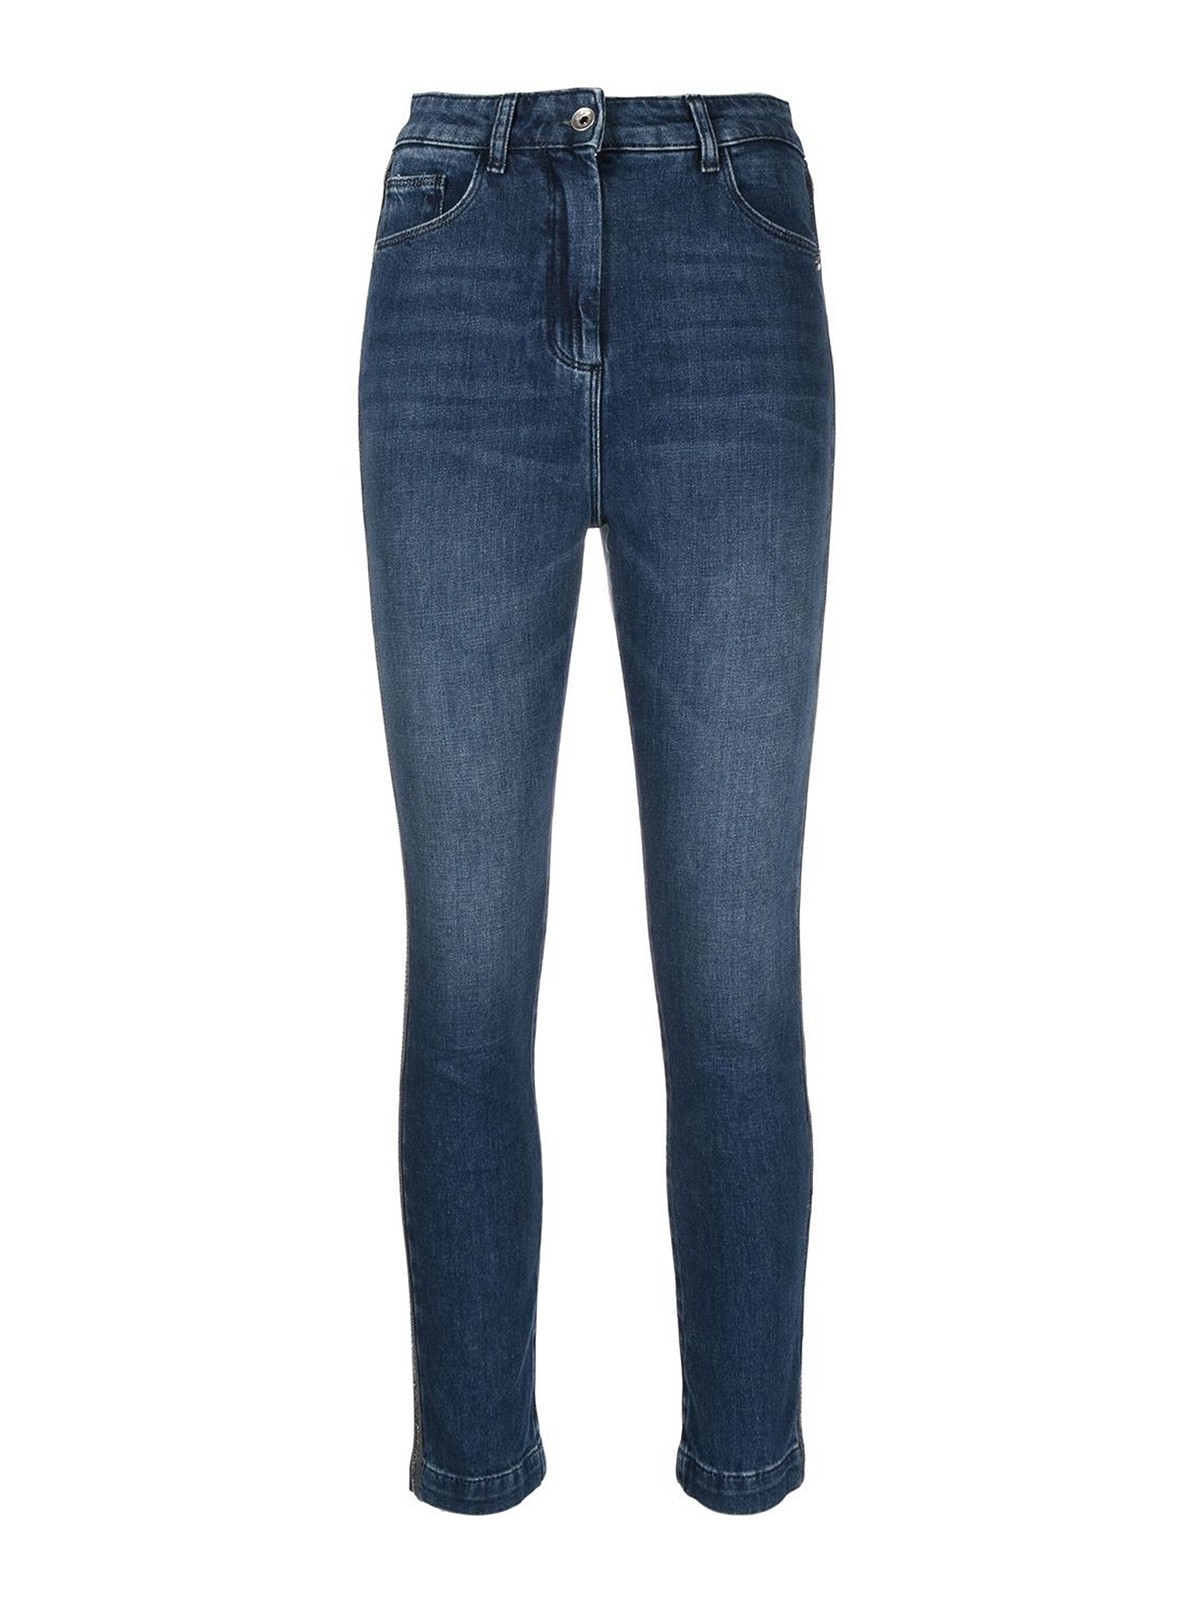 stof in de ogen gooien operatie constant Skinny jeans Patrizia Pepe - Skinny jeans with rhinestone band at the side  - 8P0505D038C946